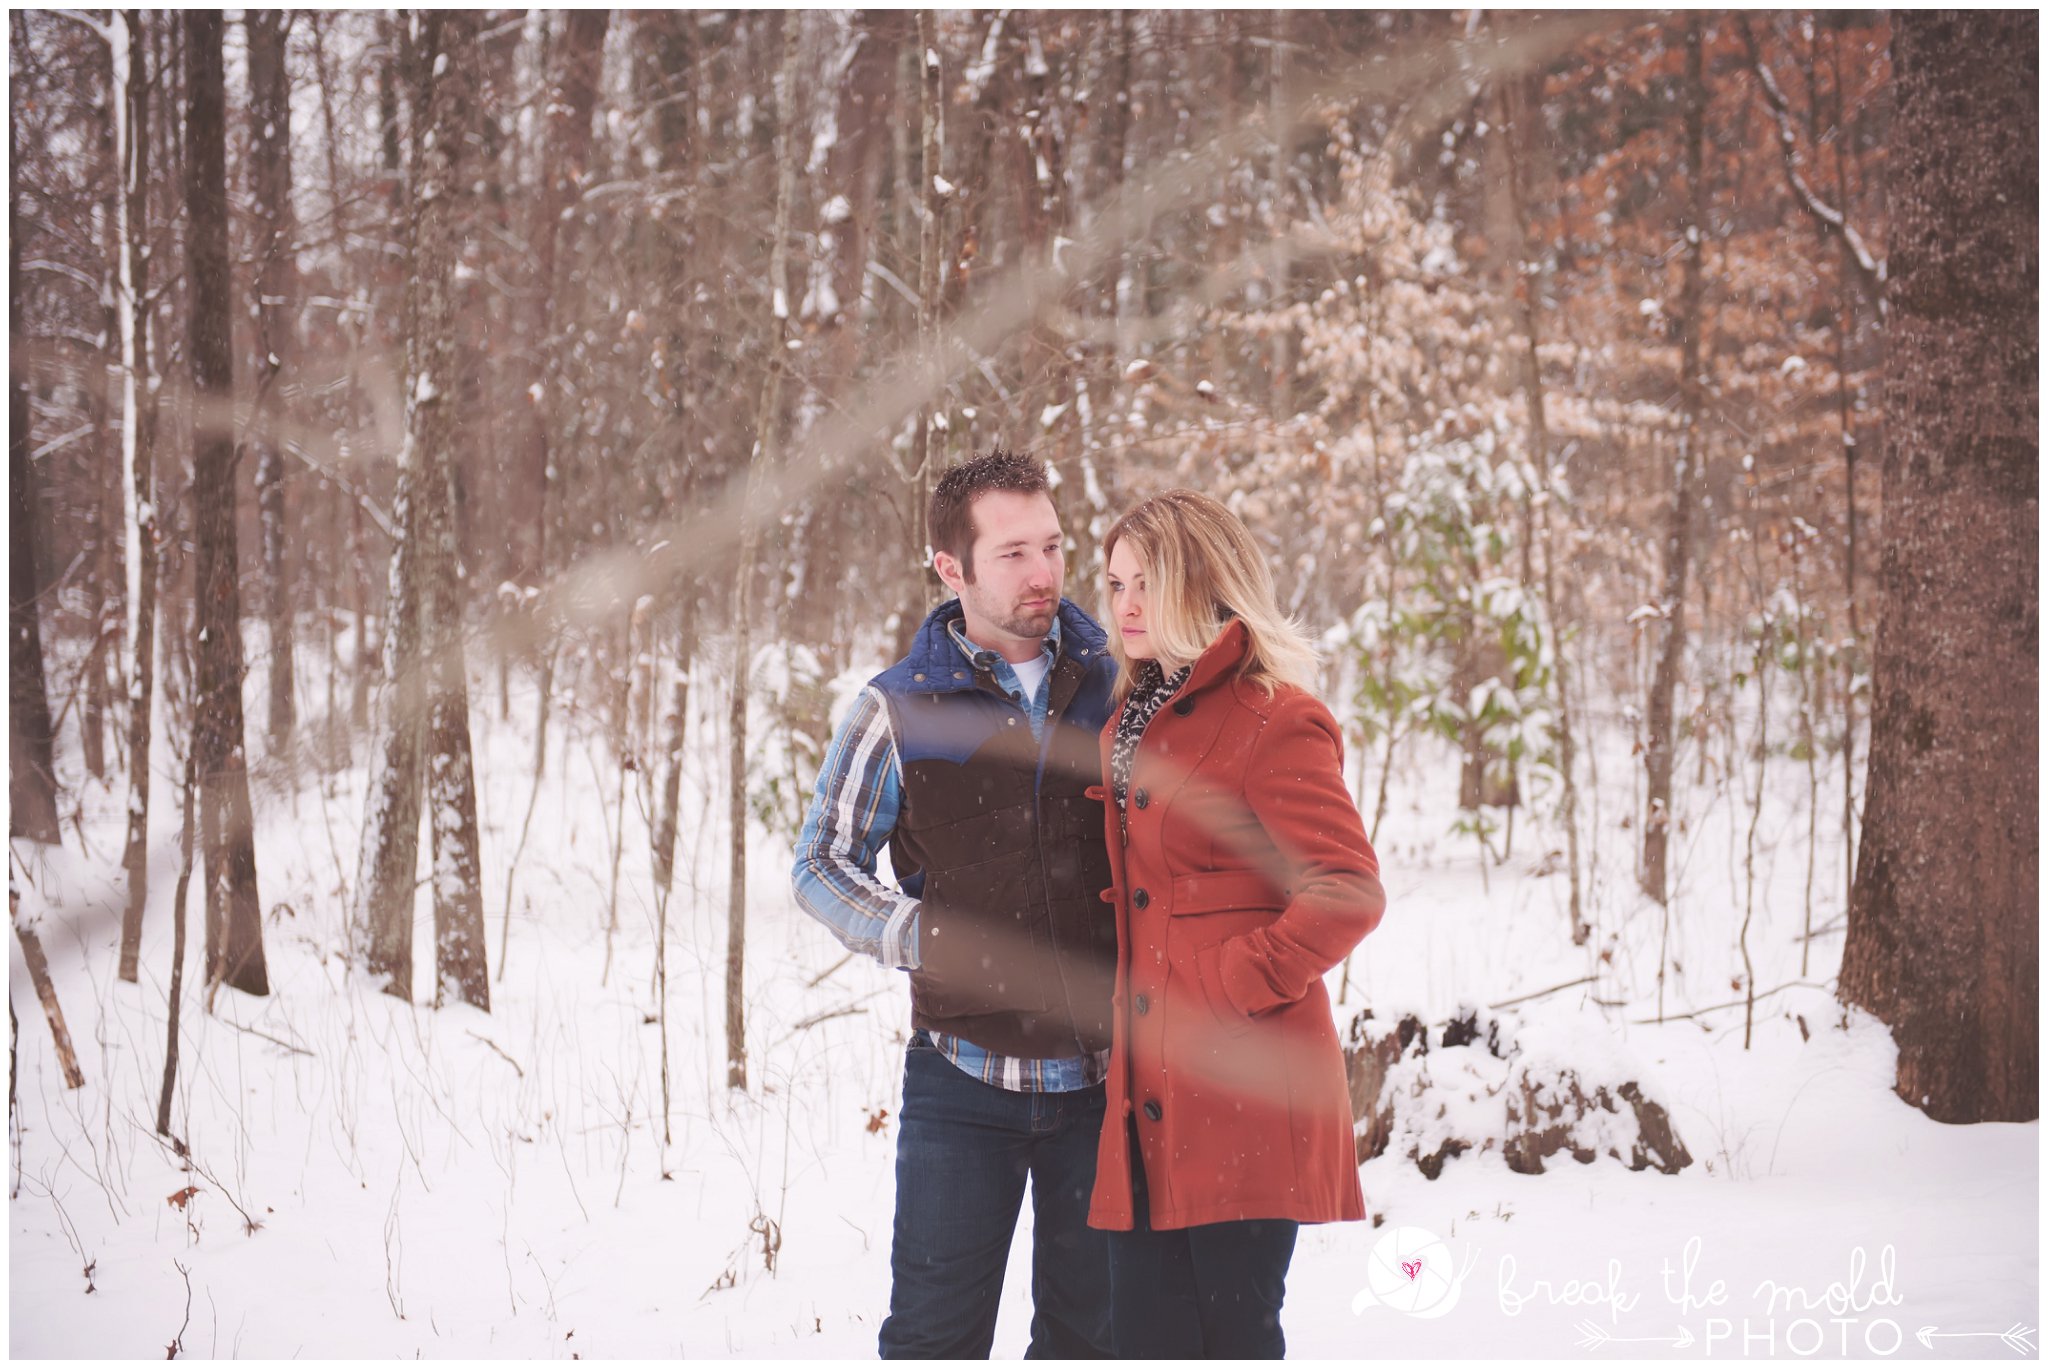 break-the-mold-photo-snowy-day-engagement-photos-knoxville-tn-tennessee-snow-day-pictures-winter-outdoor-unique-family_1503.jpg